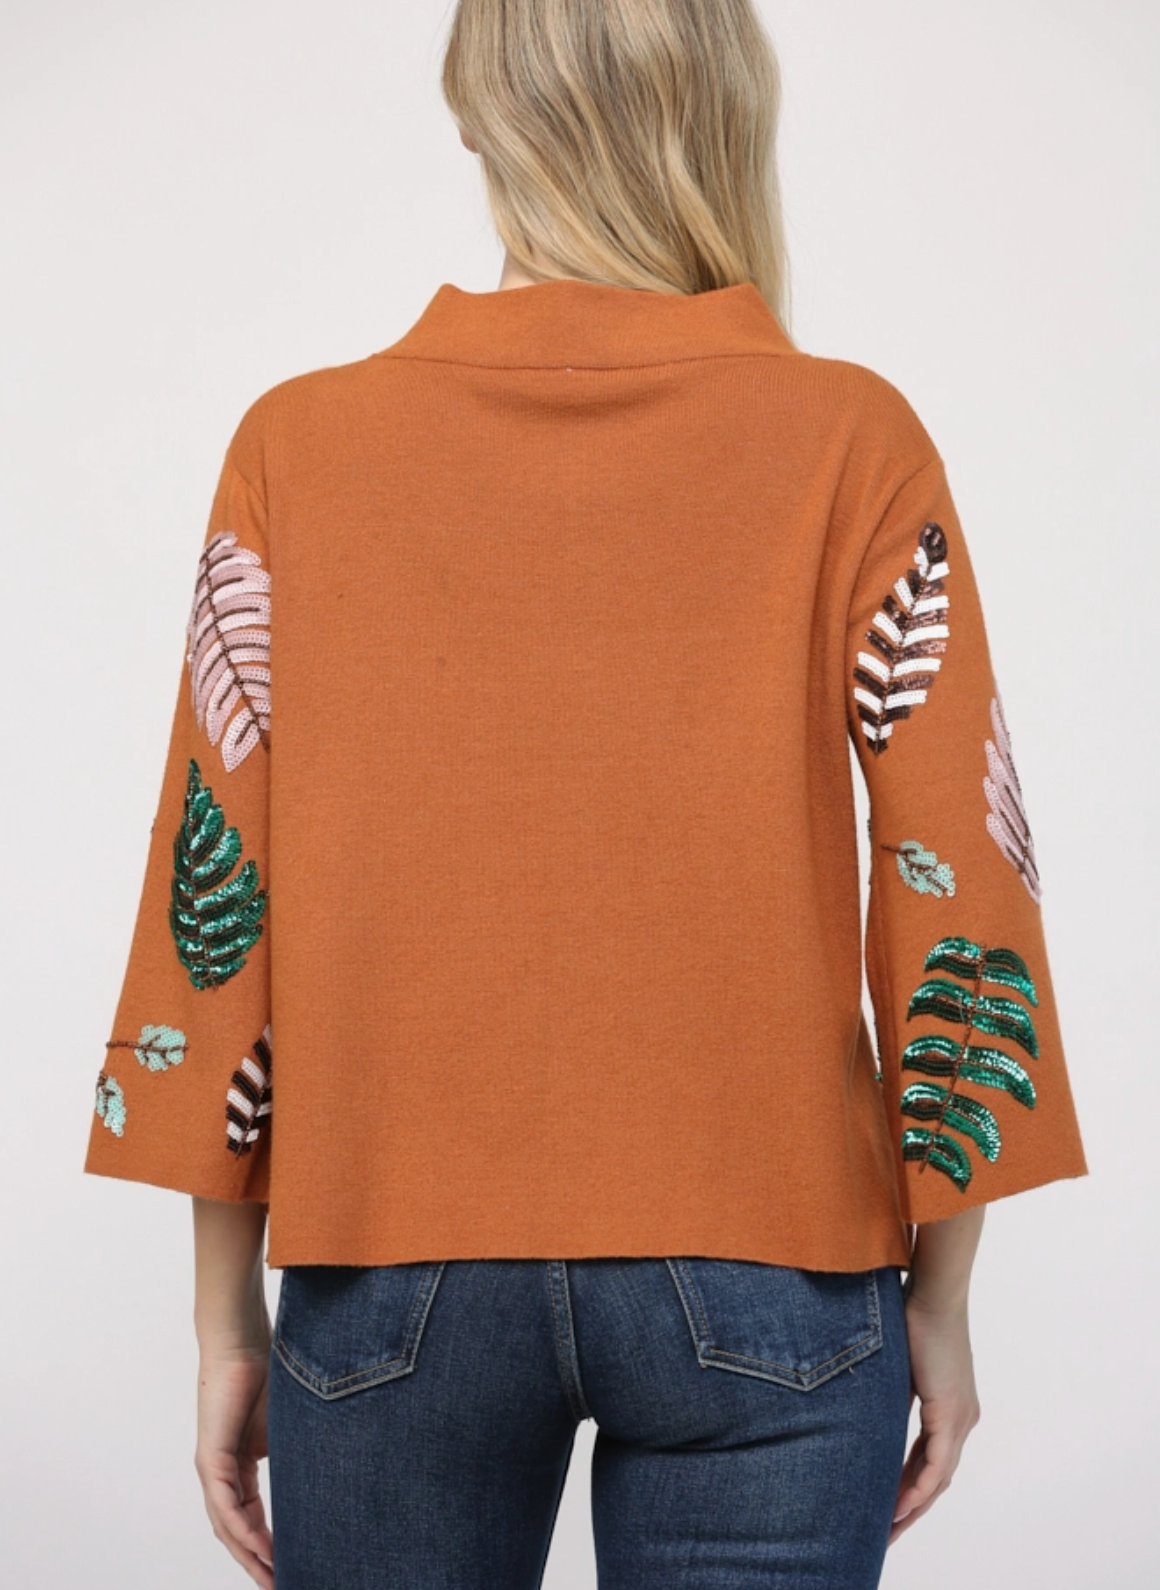 Feathers & Ferns Sequin Sweater